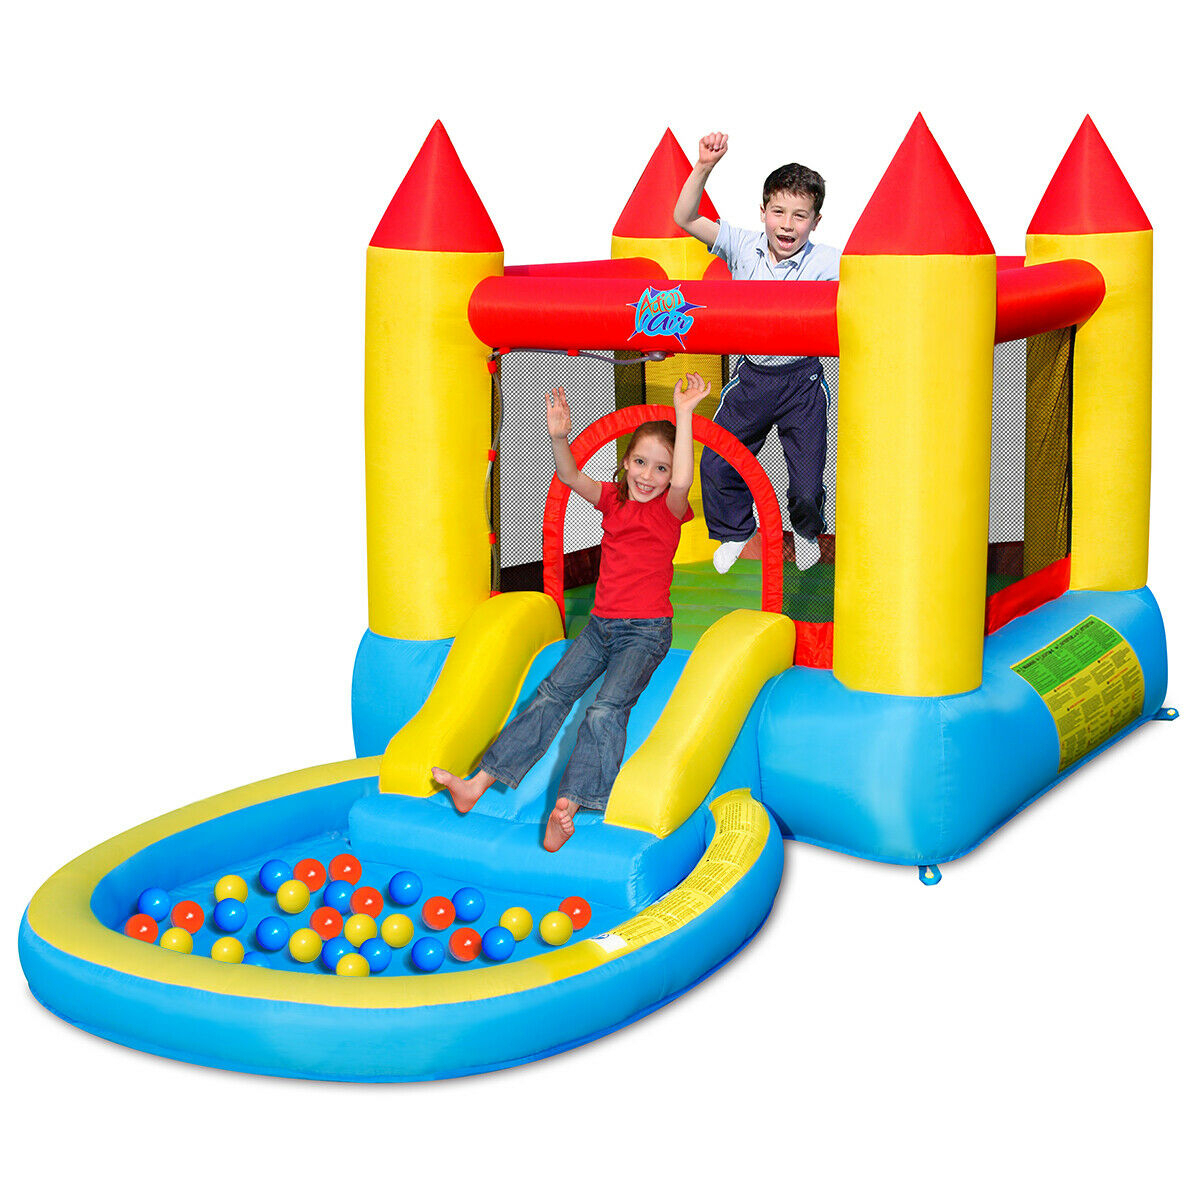 Inflatable Bounce House Kids Slide Jumping Castle Bouncer W/Pool And 480W Blower